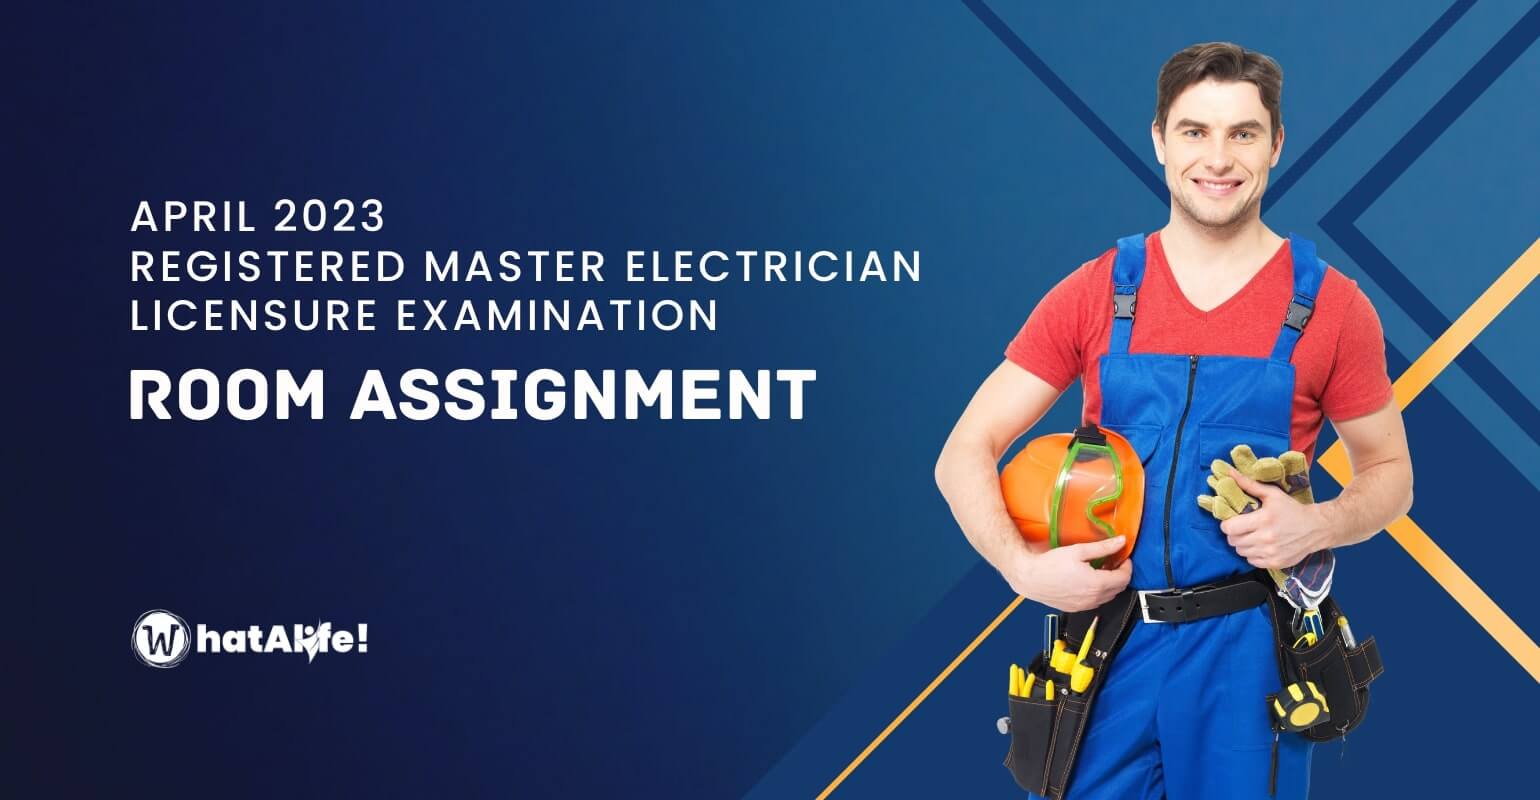 room assignment april 2023 registered master electricians licensure exam